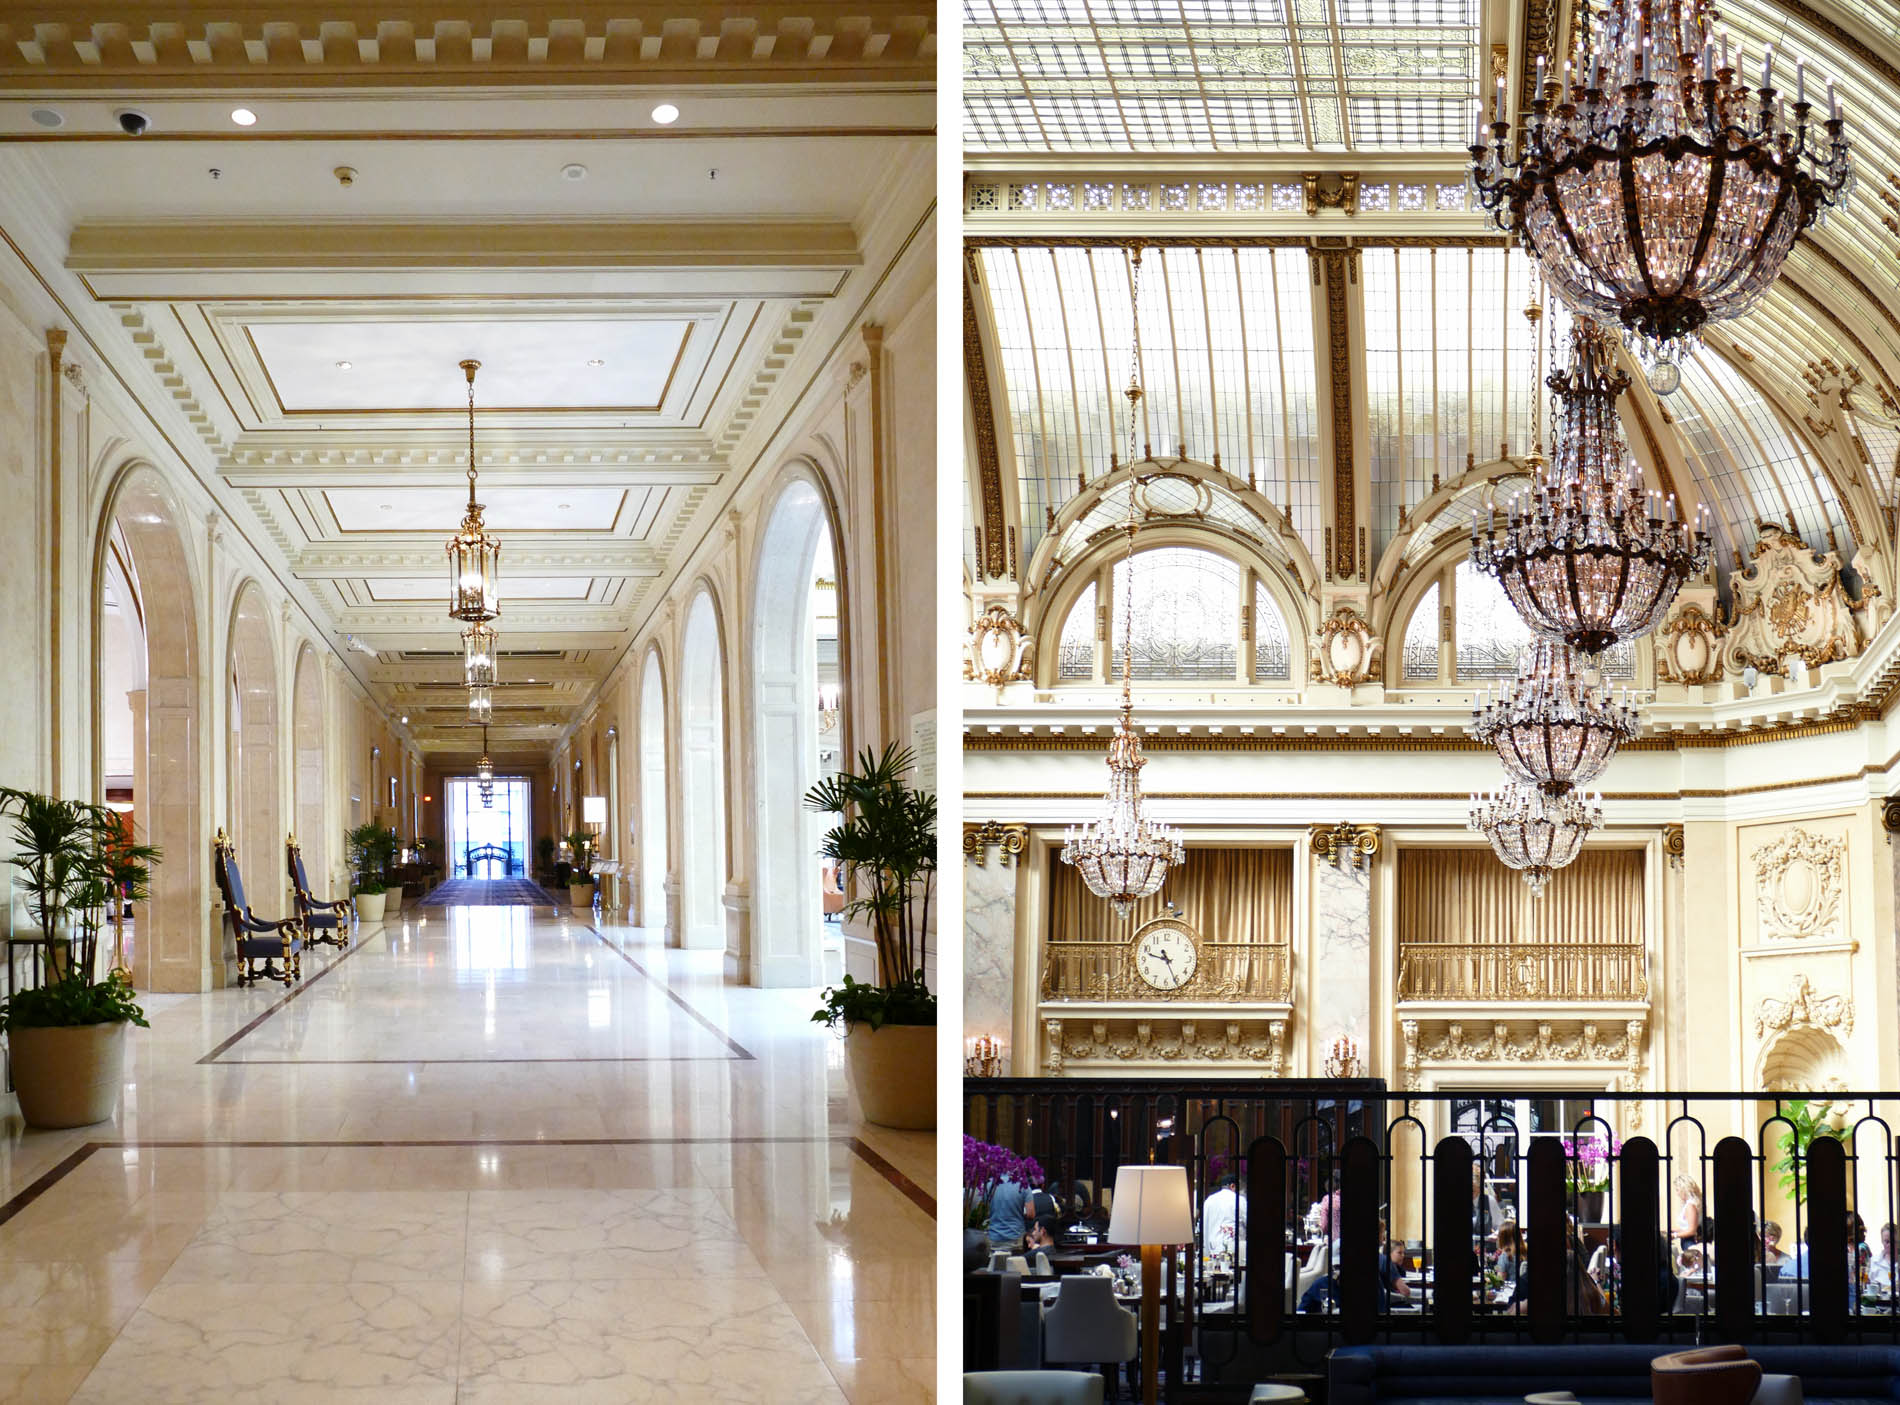 The Palace Hotel + Travel Packing List for San Francisco - The Beauty